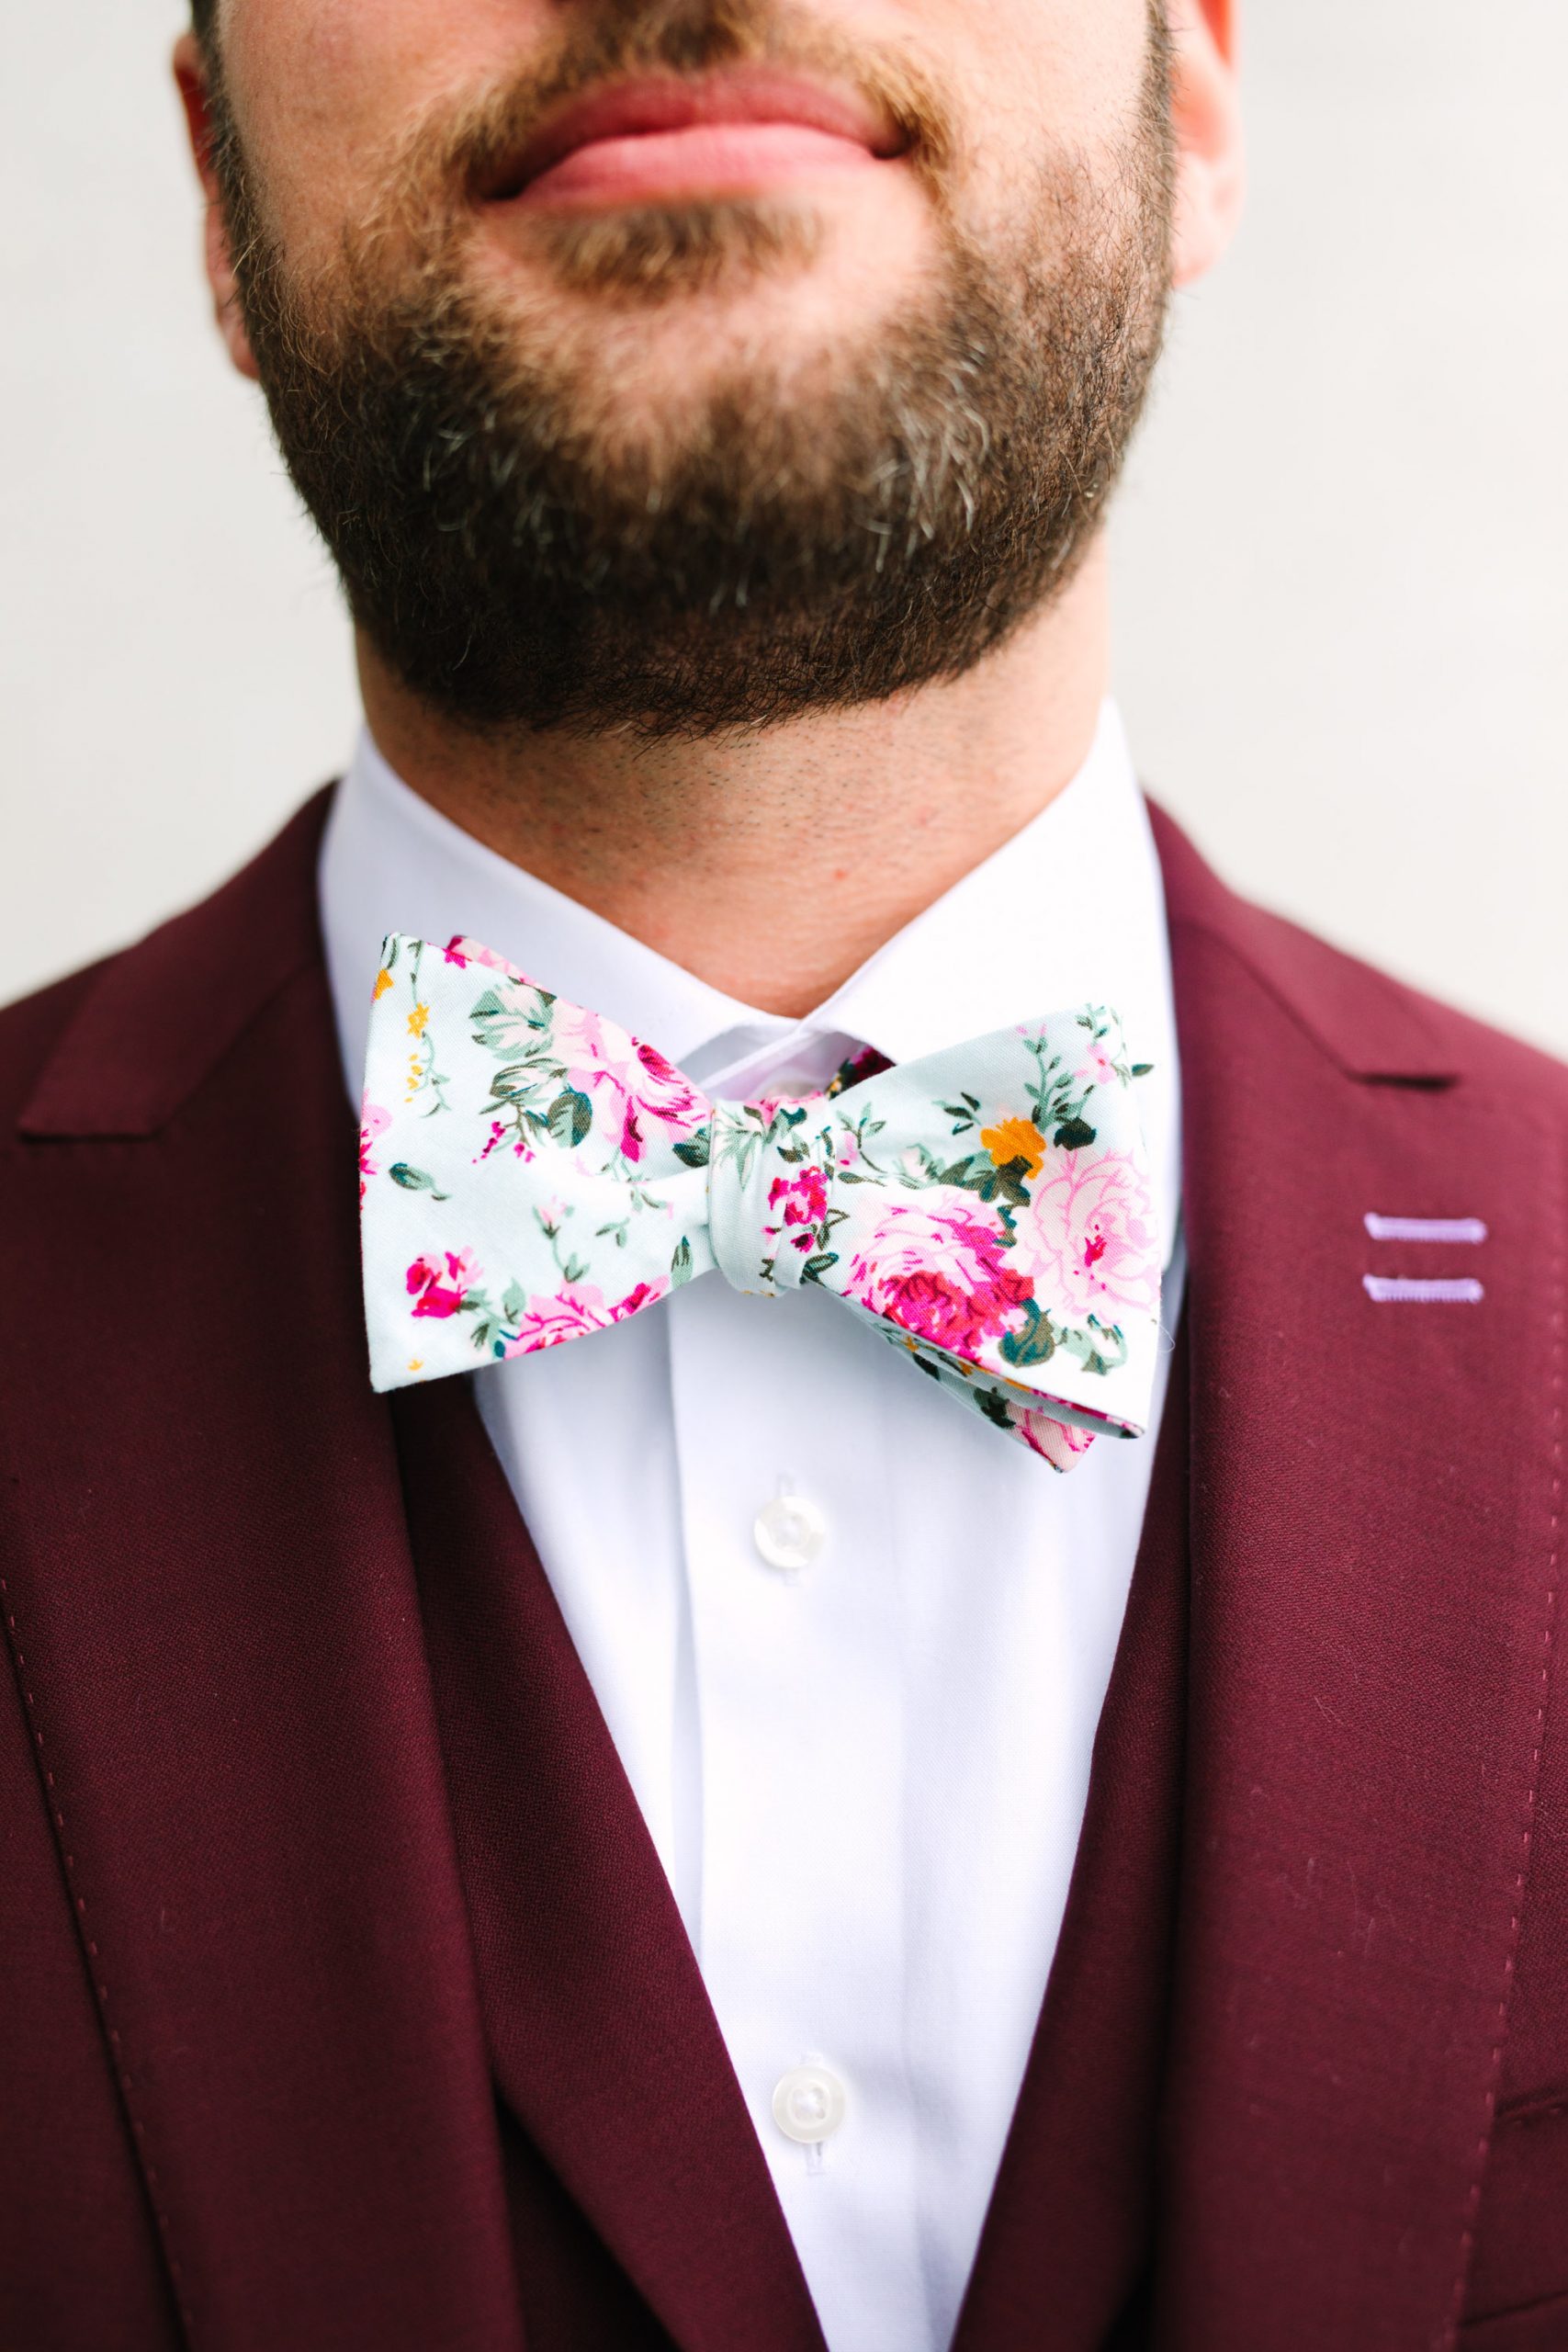 Floral bowtie by Groom getting ready in emerald tux by Mary Costa Photography